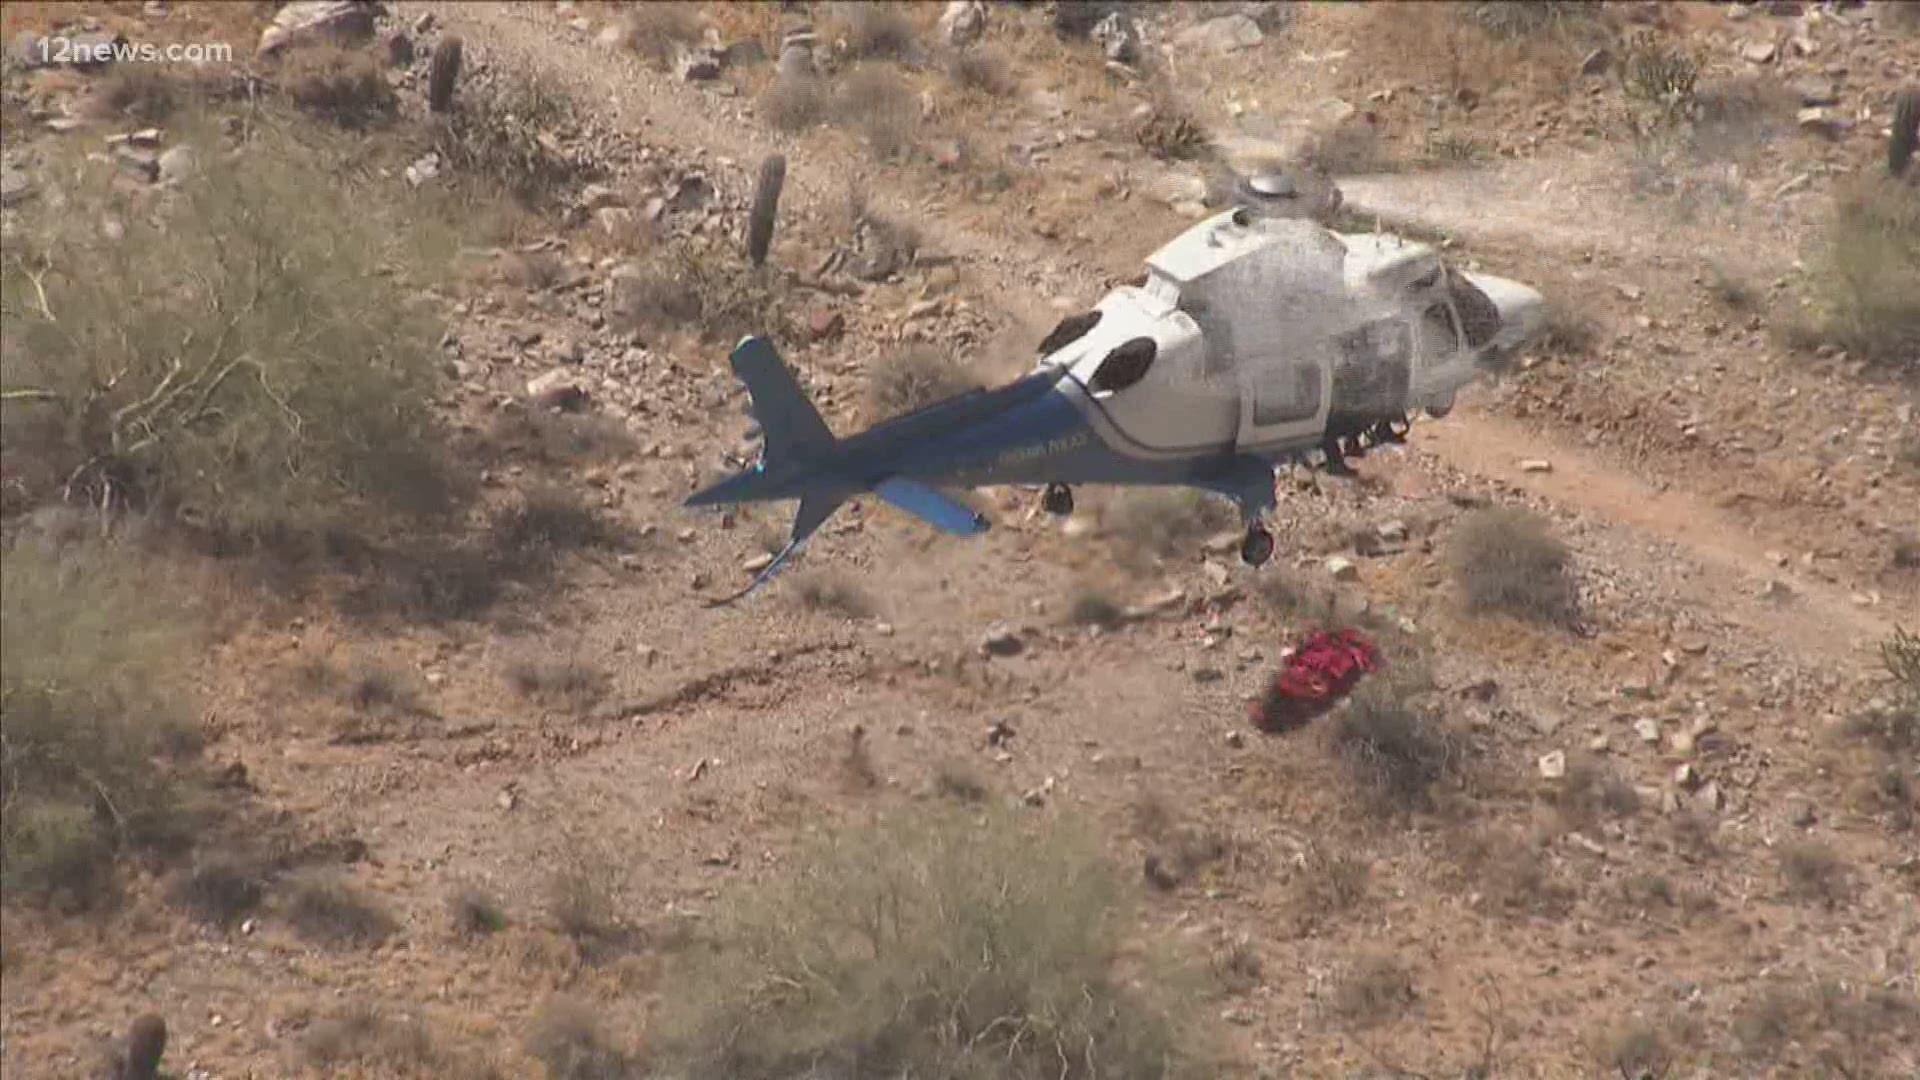 Katalin Metro was hiking up Piestewa Peak when she injured her face and head. Her rescue led to her spinning in a basket 174 times underneath a helicopter.